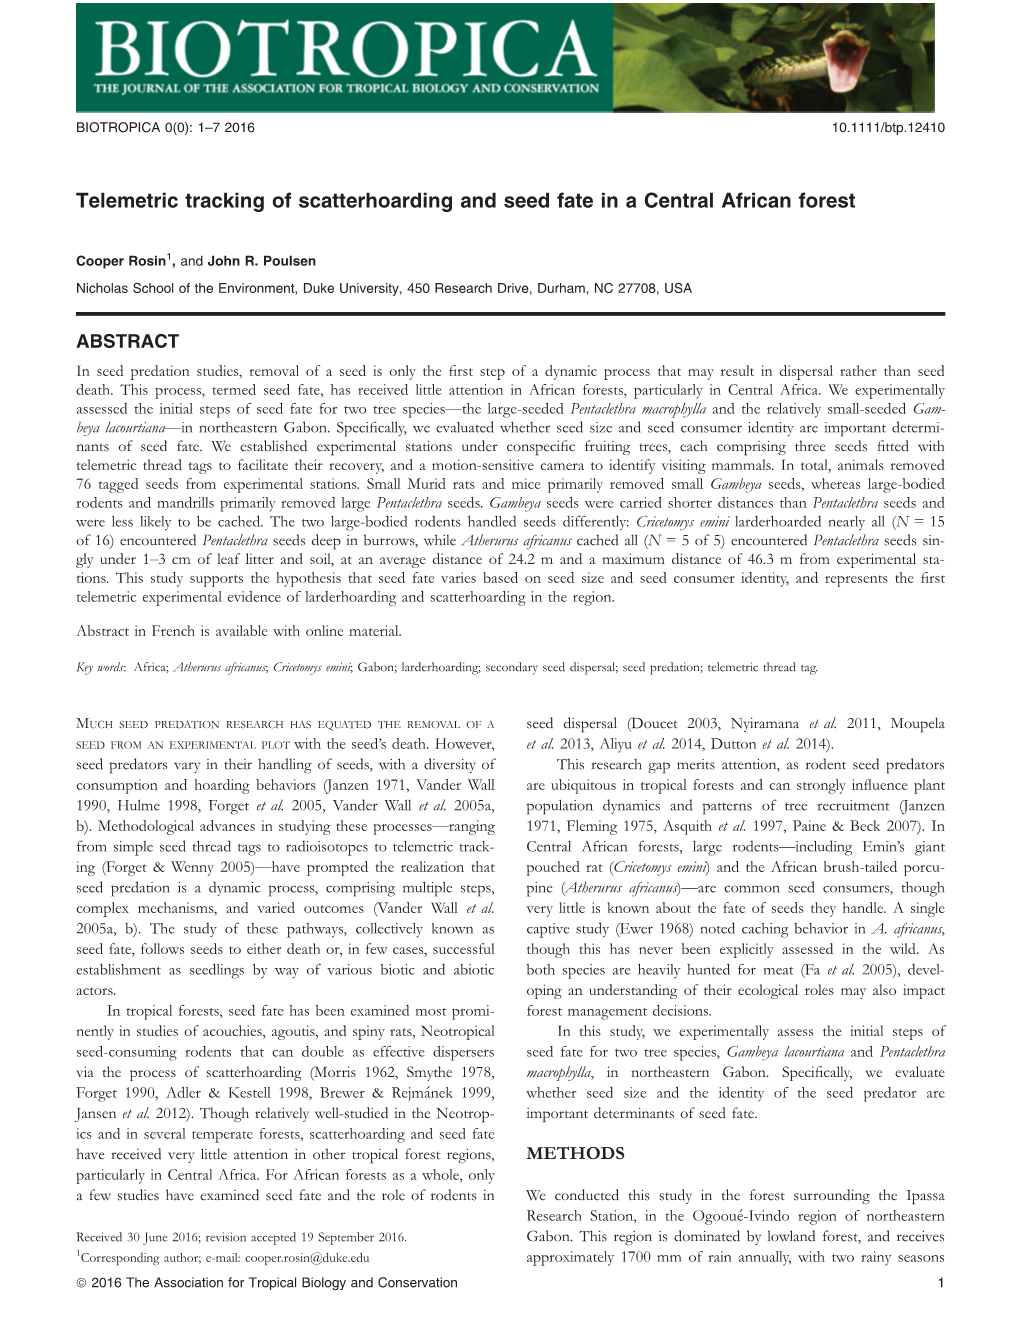 Telemetric Tracking of Scatterhoarding and Seed Fate in a Central African Forest